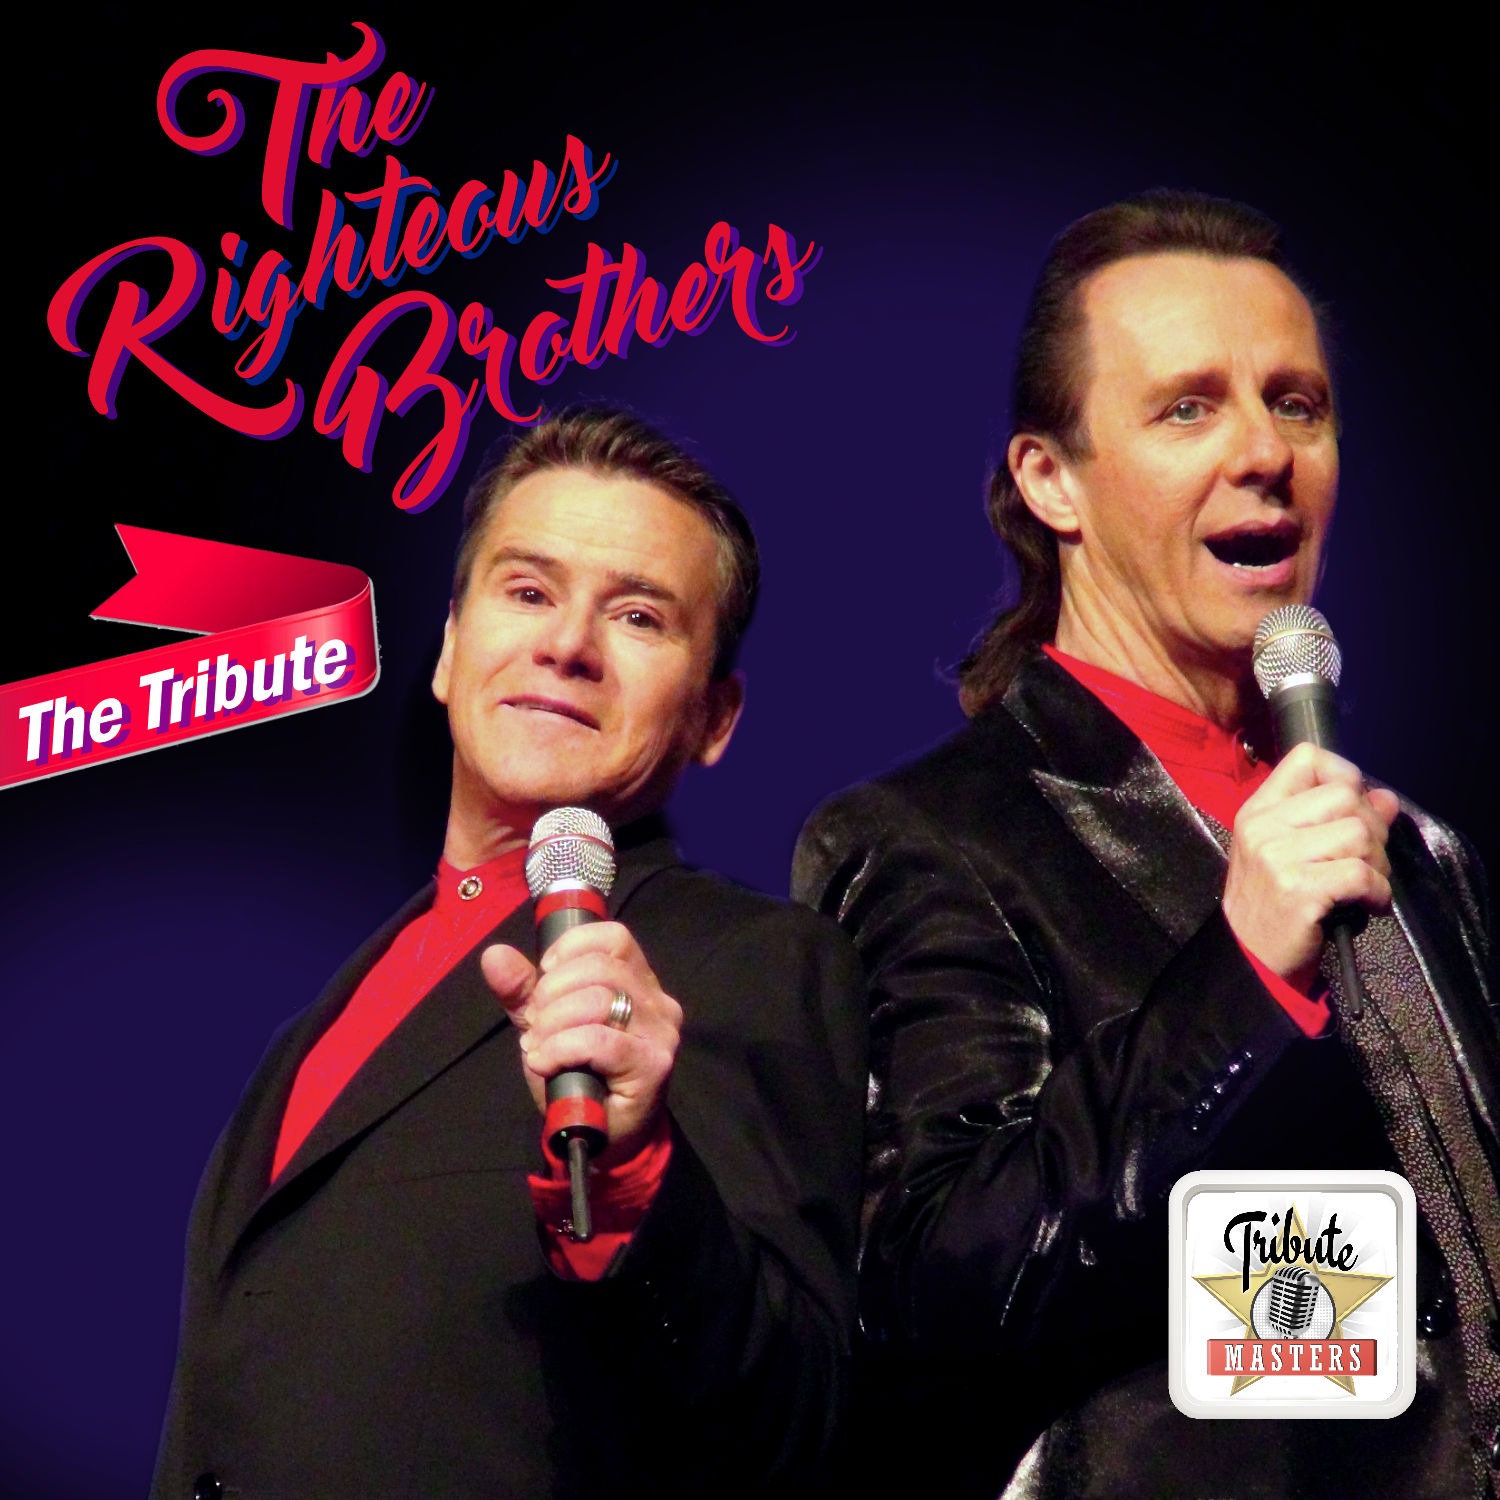 The Righteous Brothers - A Tribute